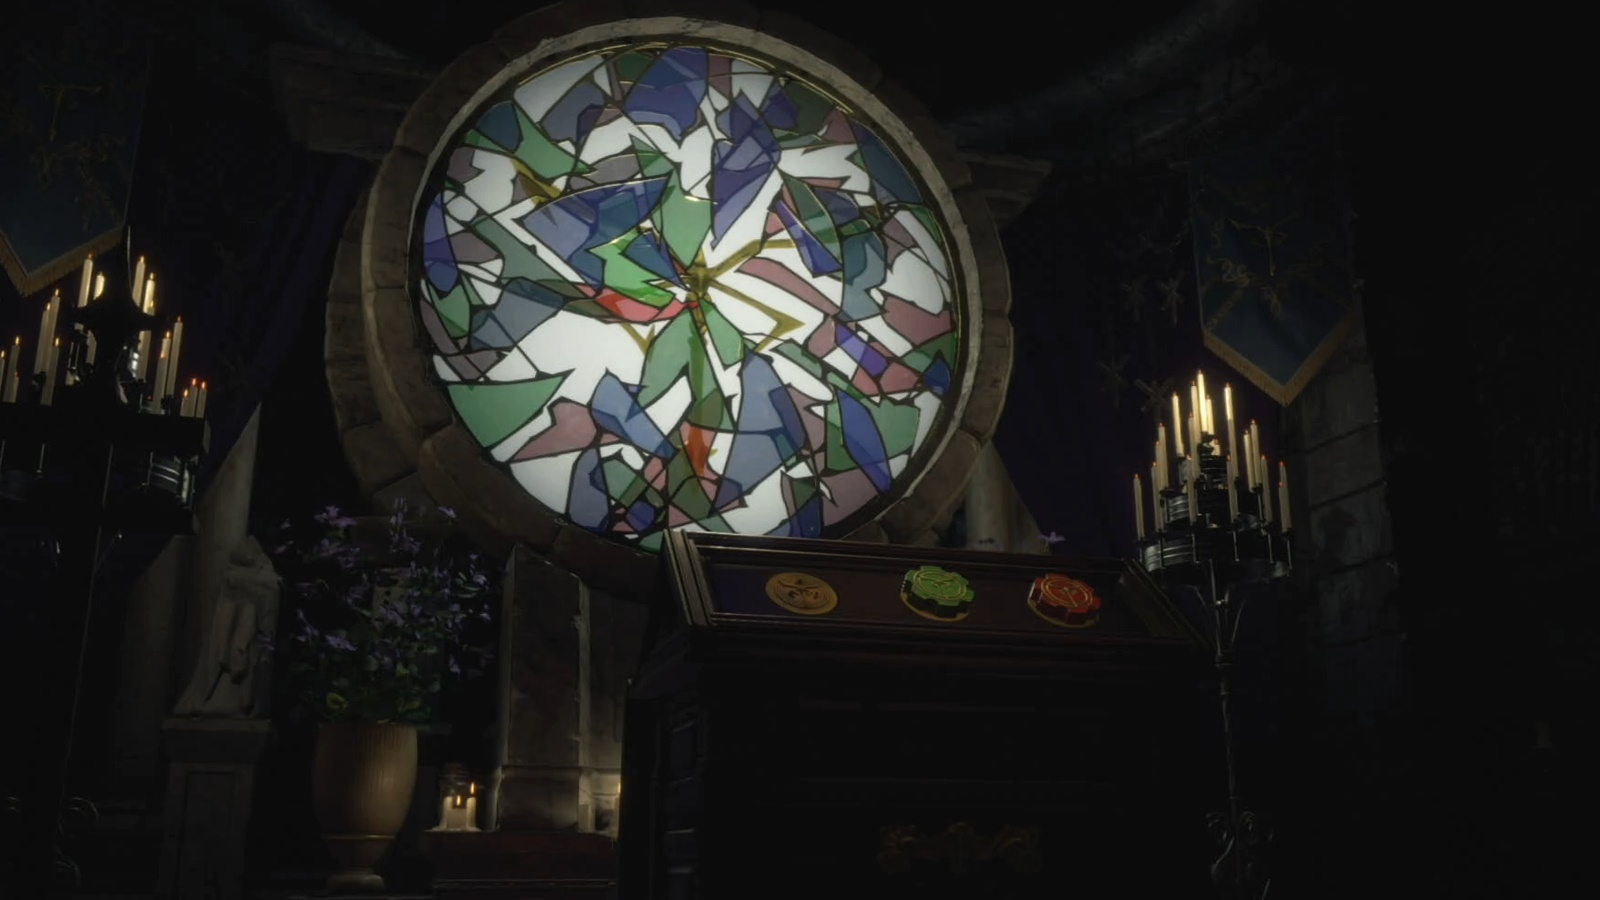 Resident Evil 4 Remake - Grandfather Clock puzzles (Standard